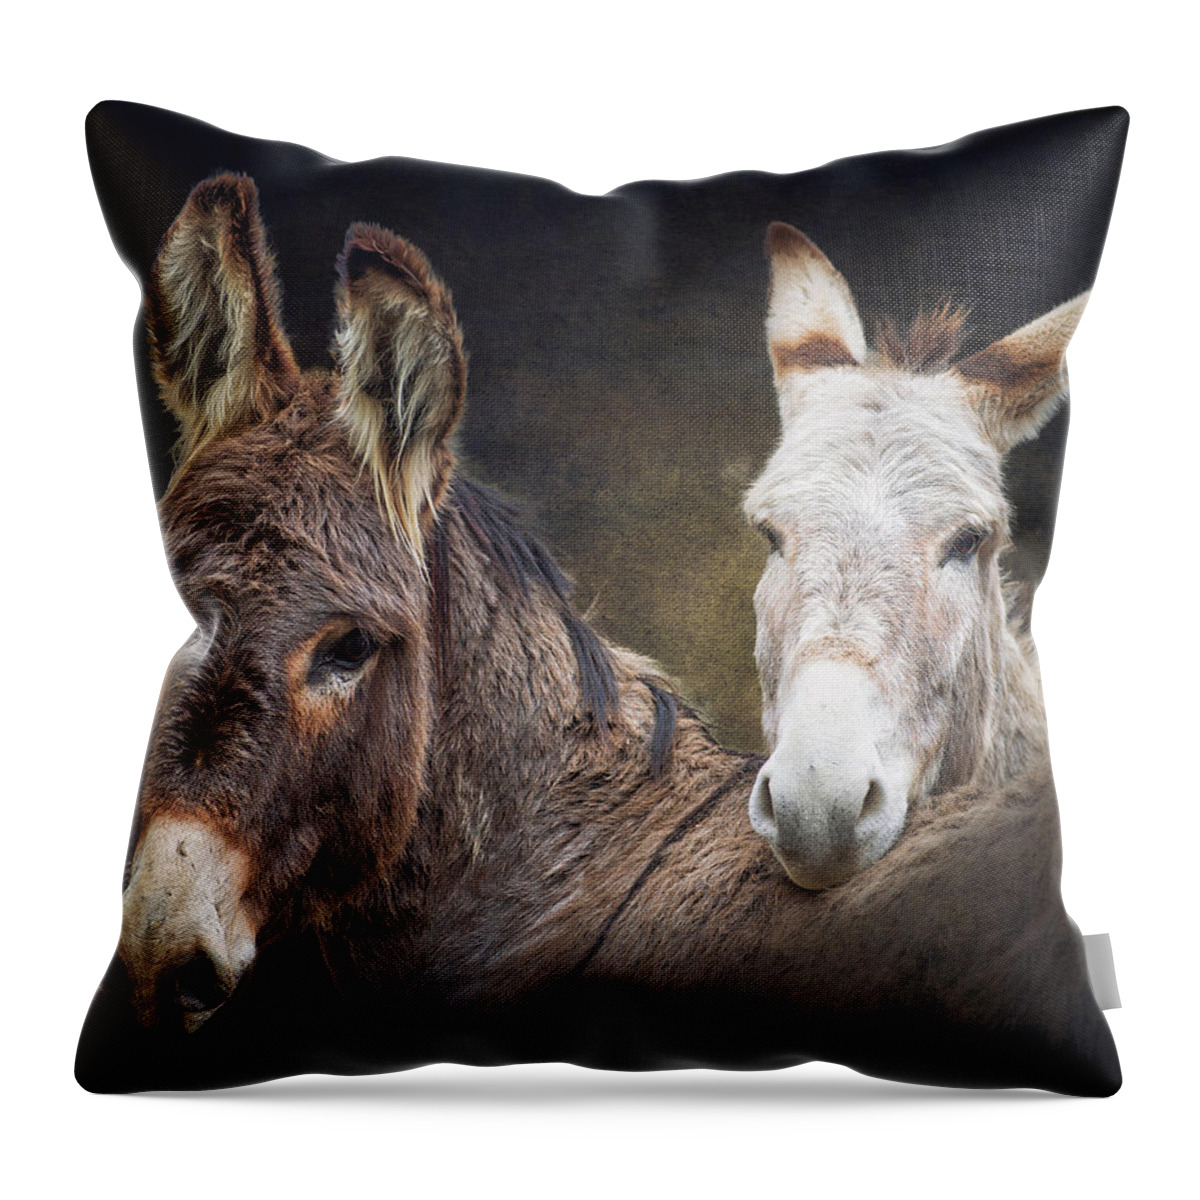 Burro Throw Pillow featuring the photograph Heckle and Jeckle by Ron McGinnis